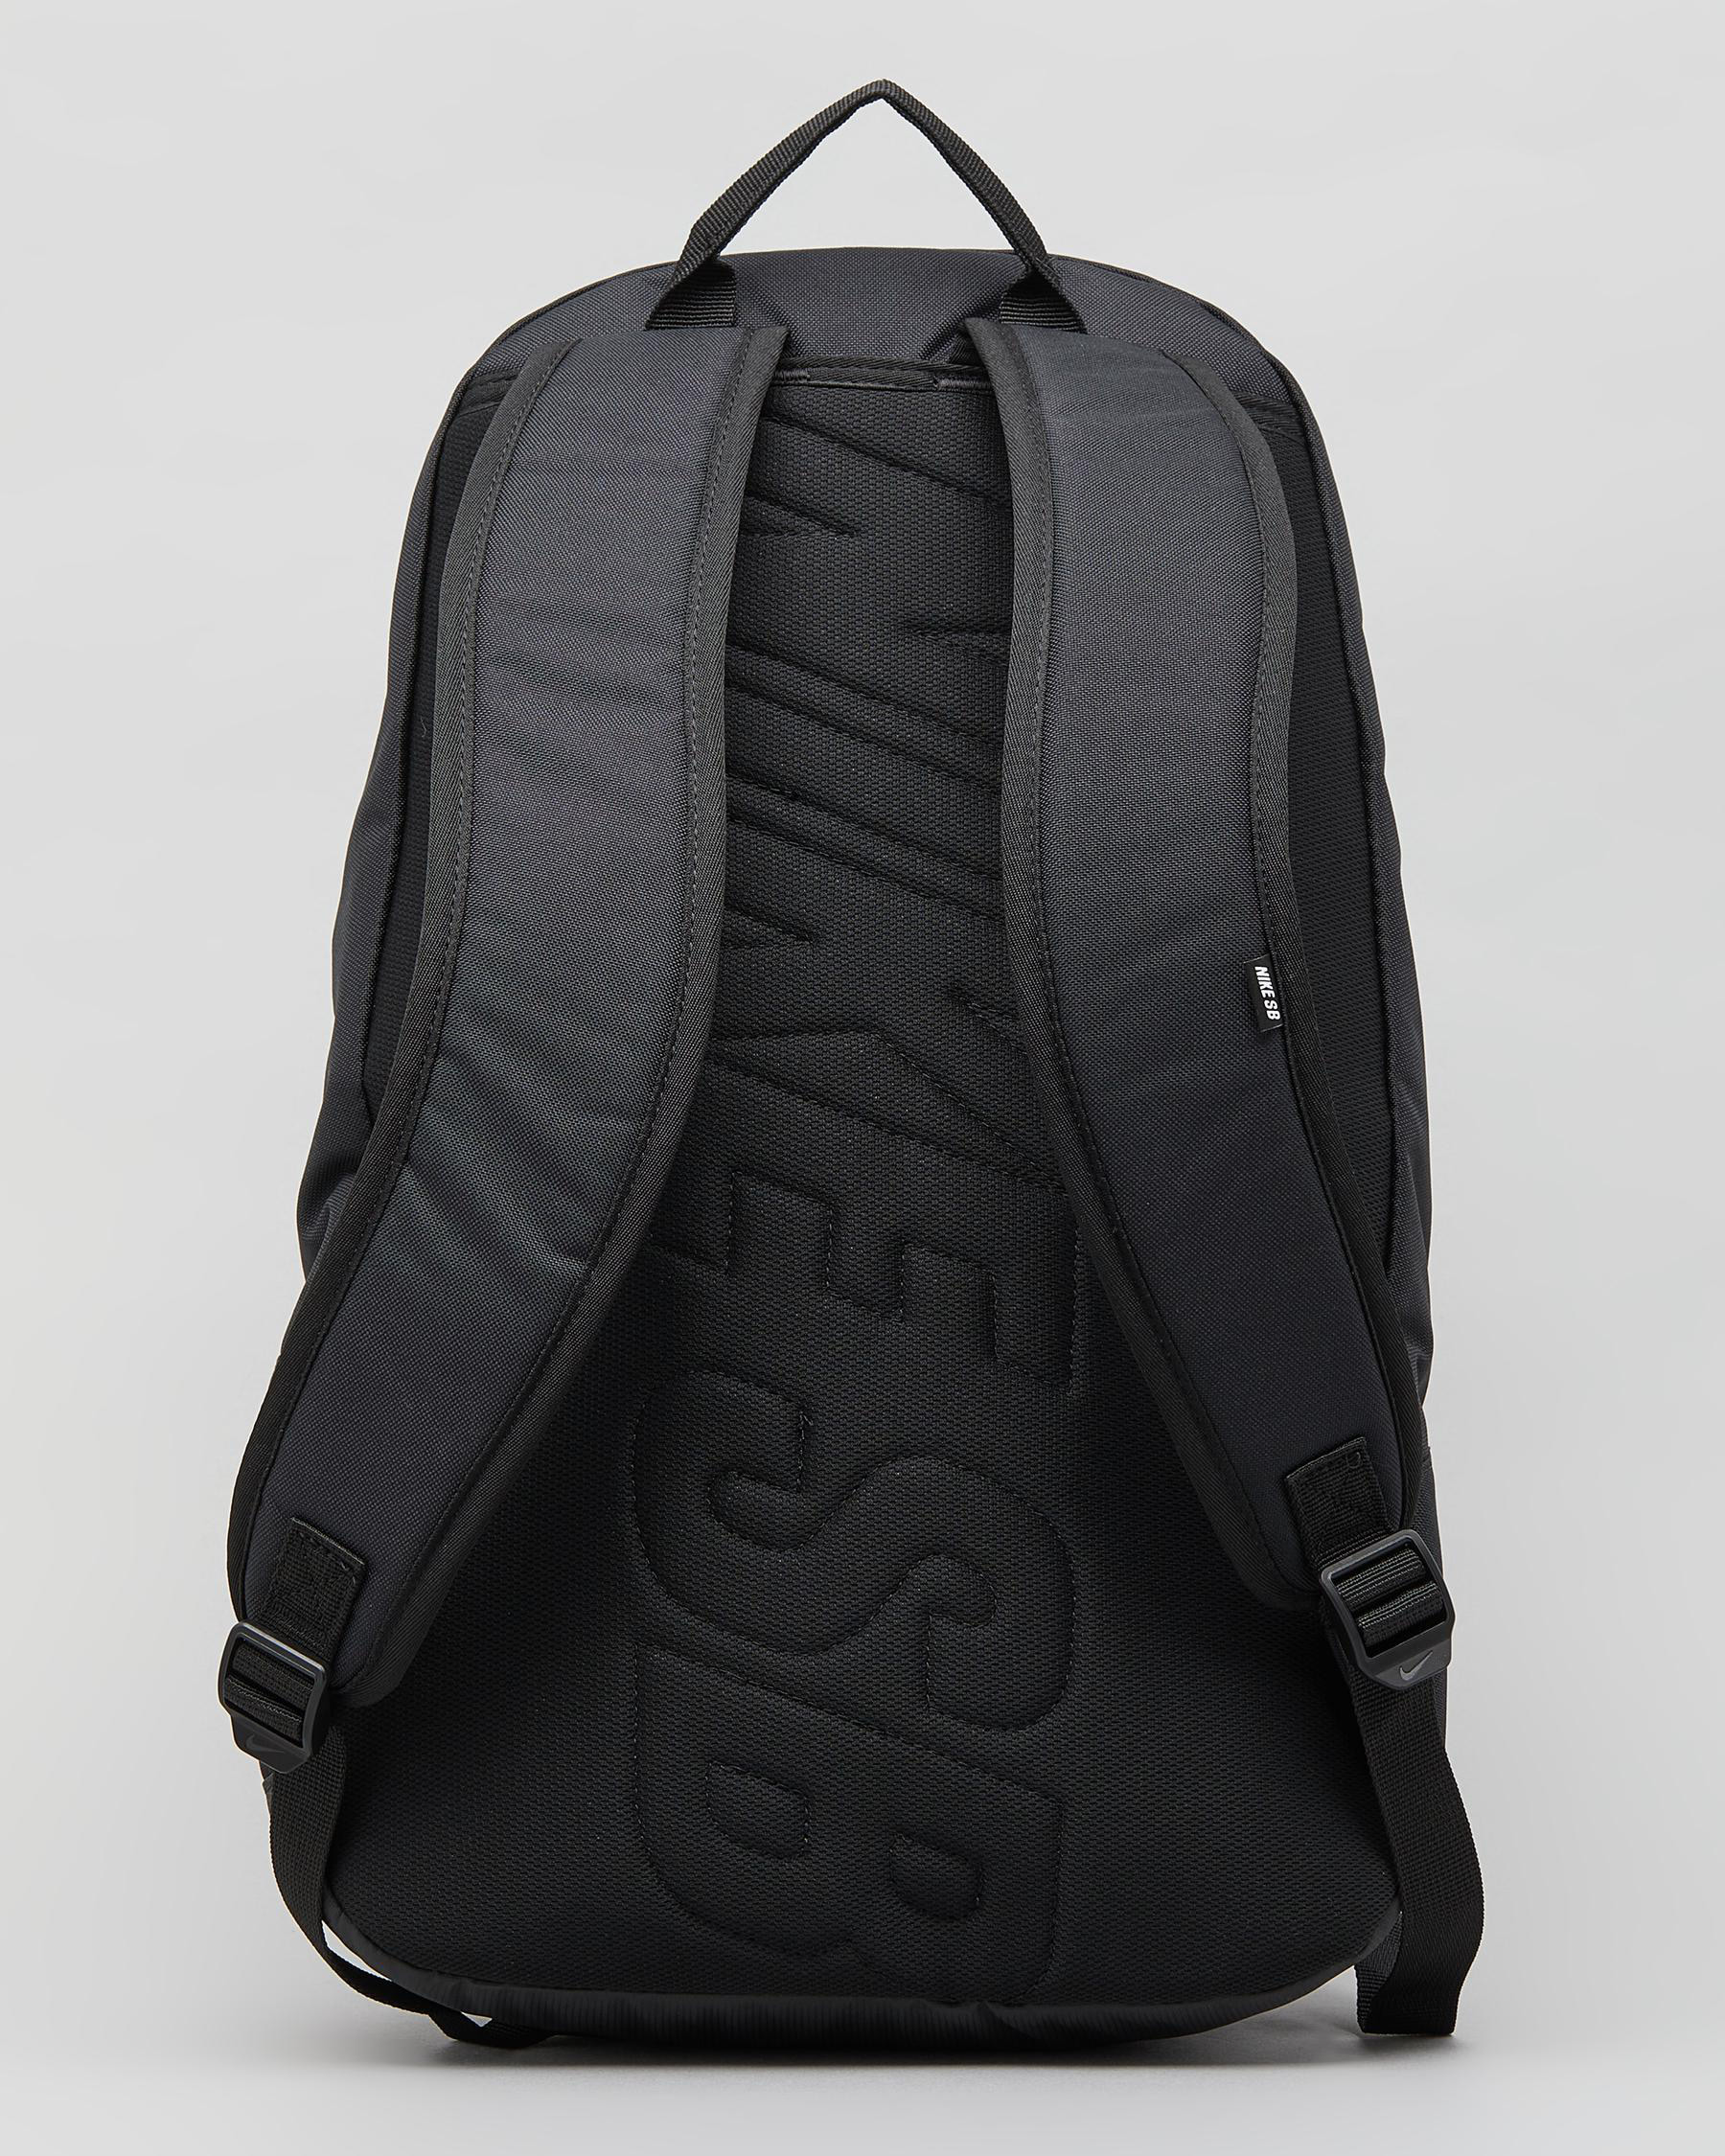 Shop Nike Courthouse Backpack In Black/black/white - Fast Shipping ...